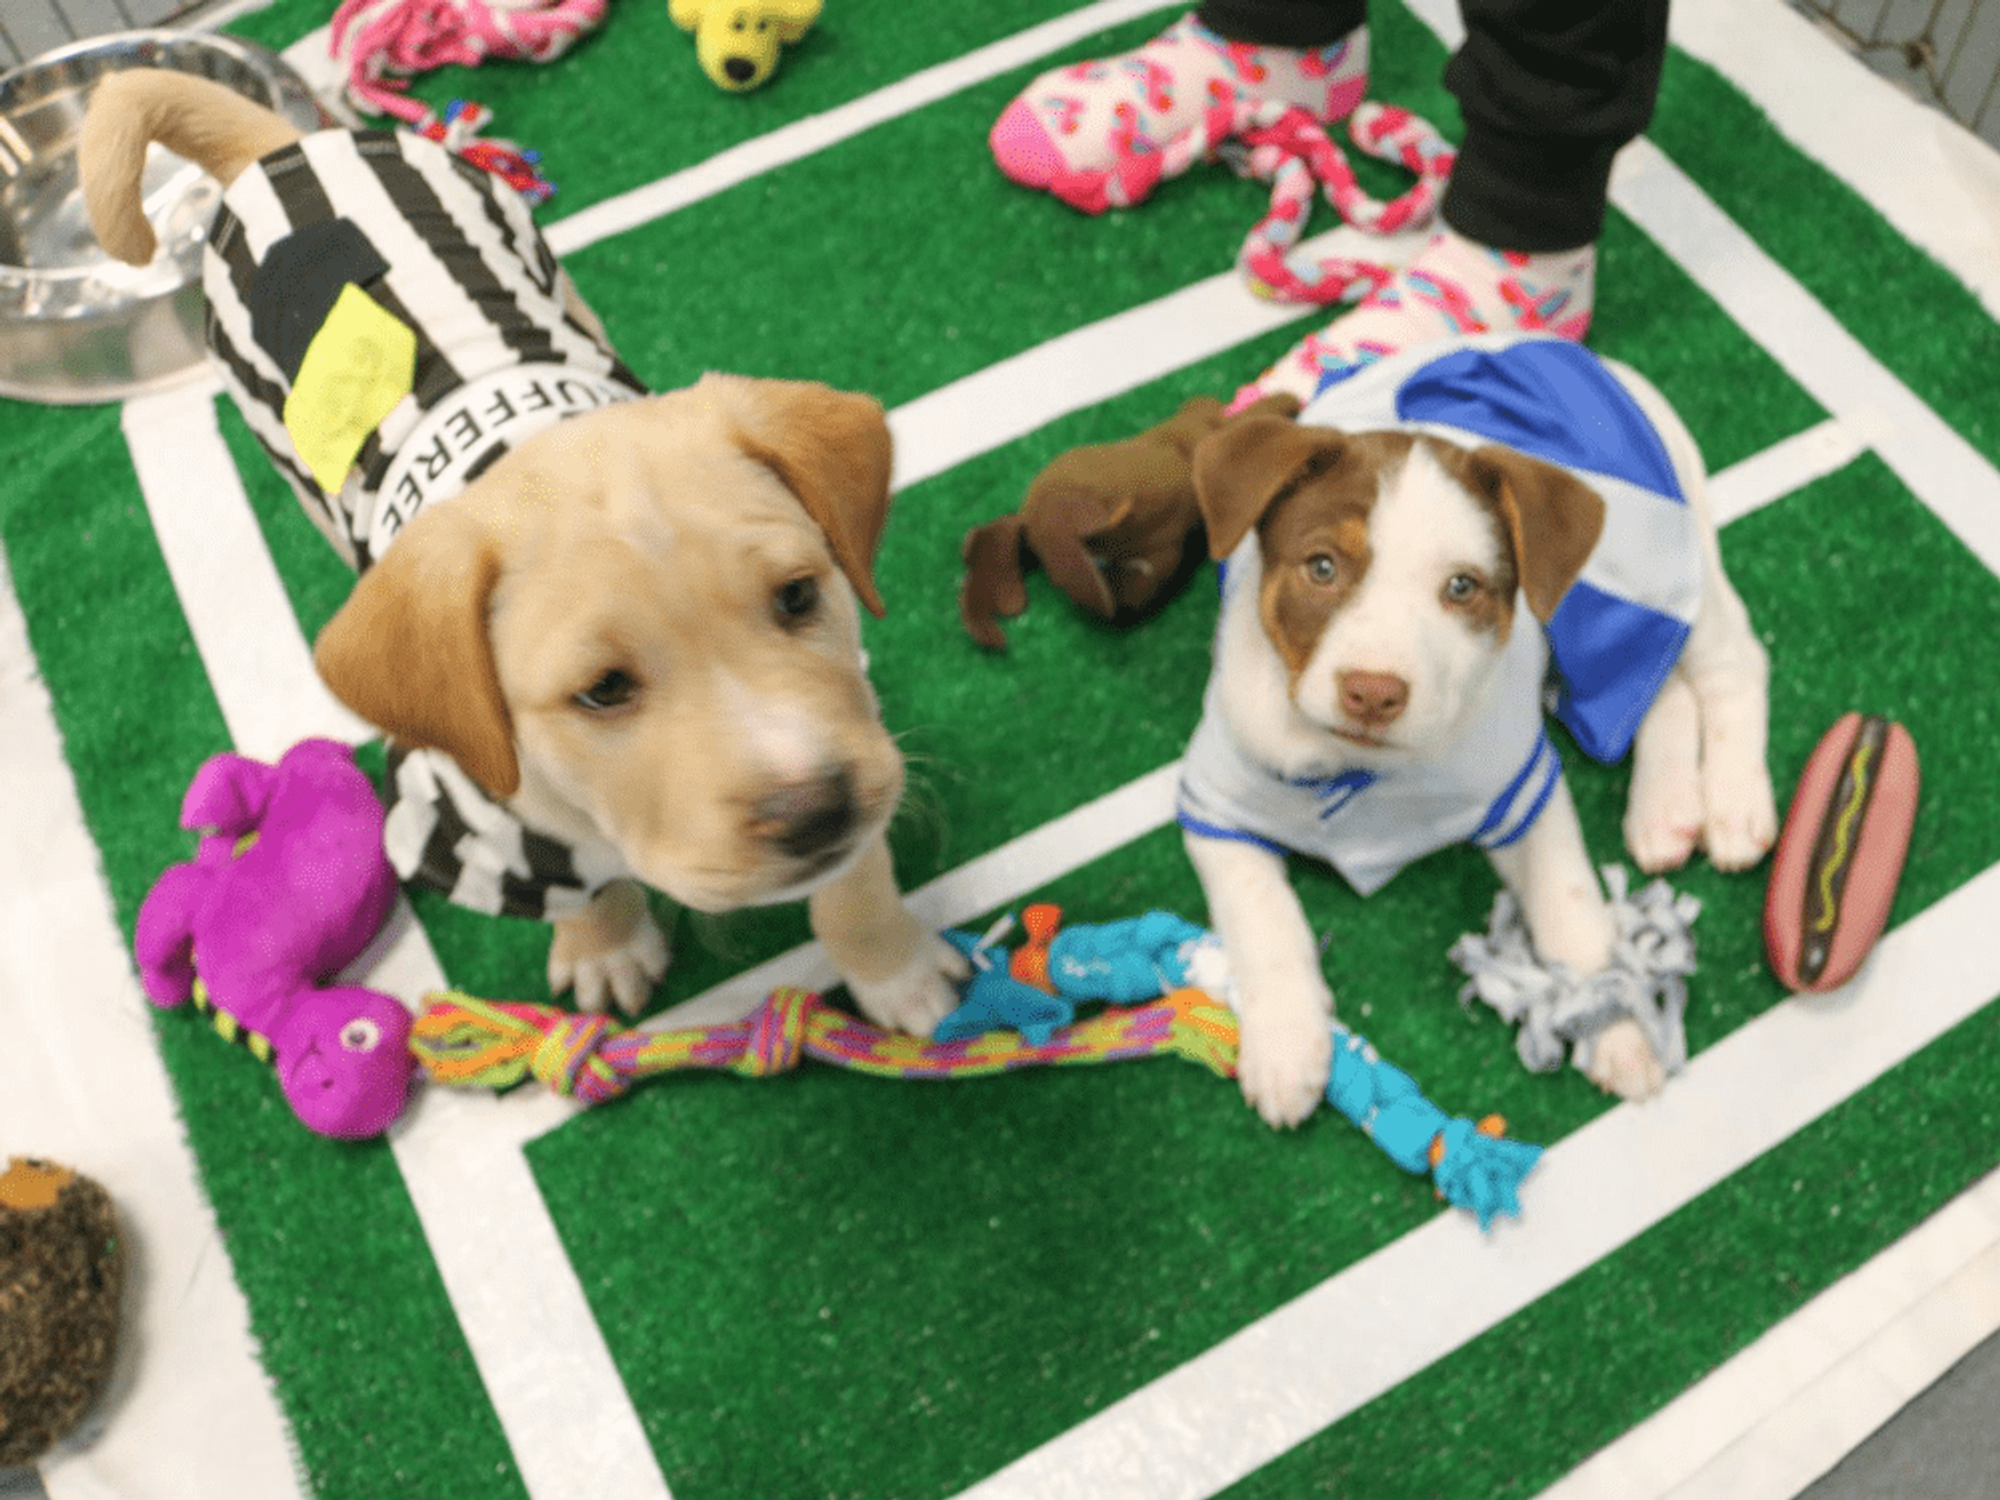 Check out the doggies at the 10th Annual Puppy Bowl on Saturday.